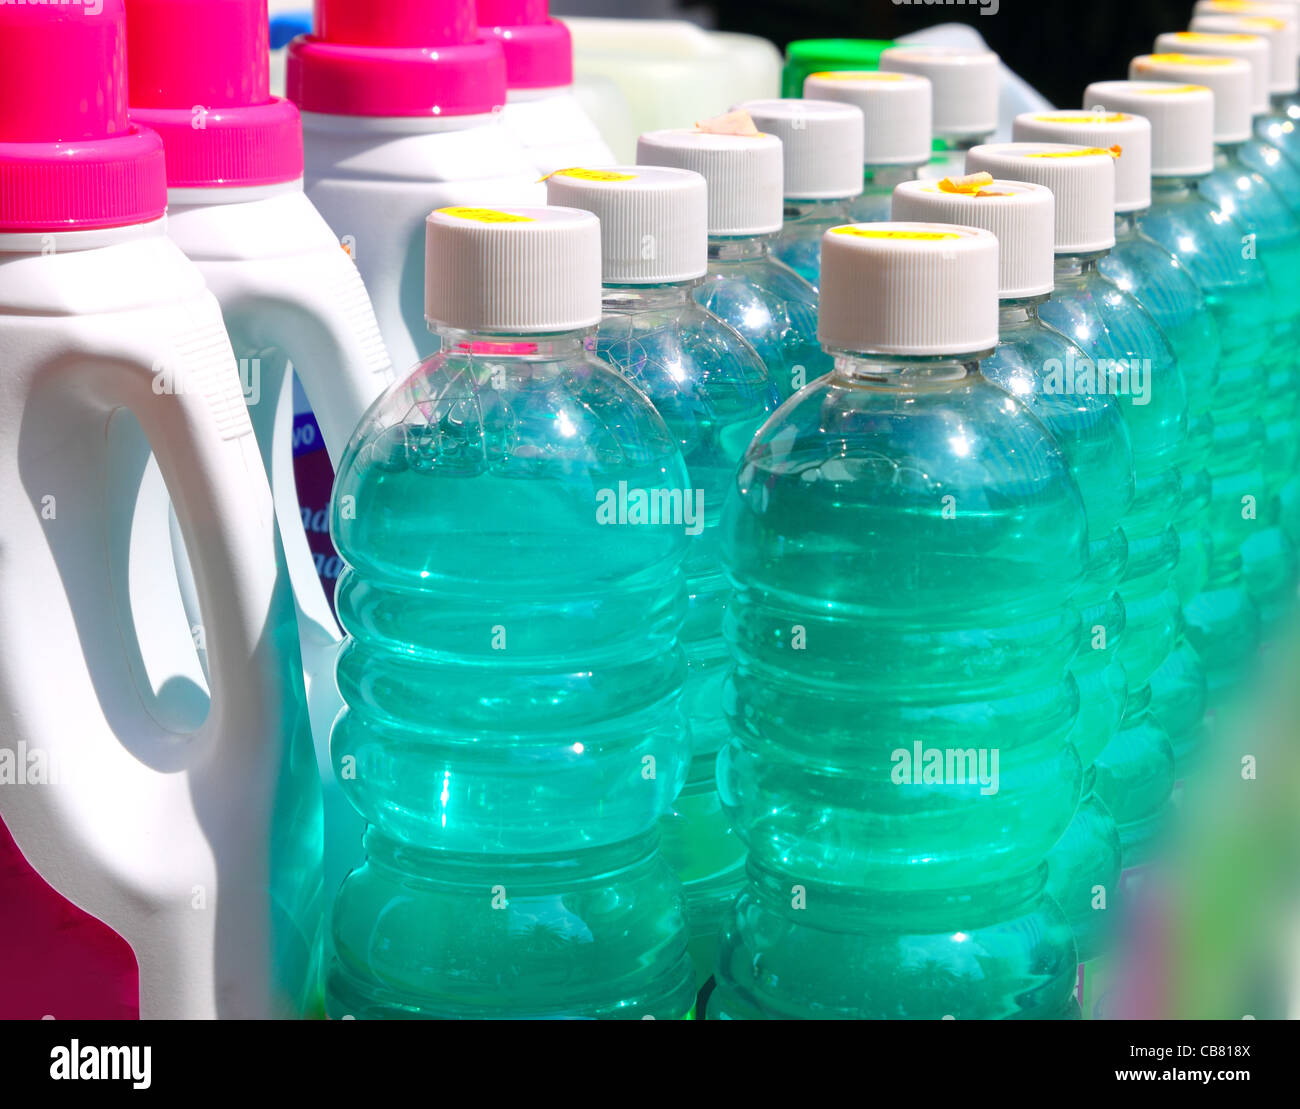 cleaning domestic chemical bottles in a row green liquid Stock Photo